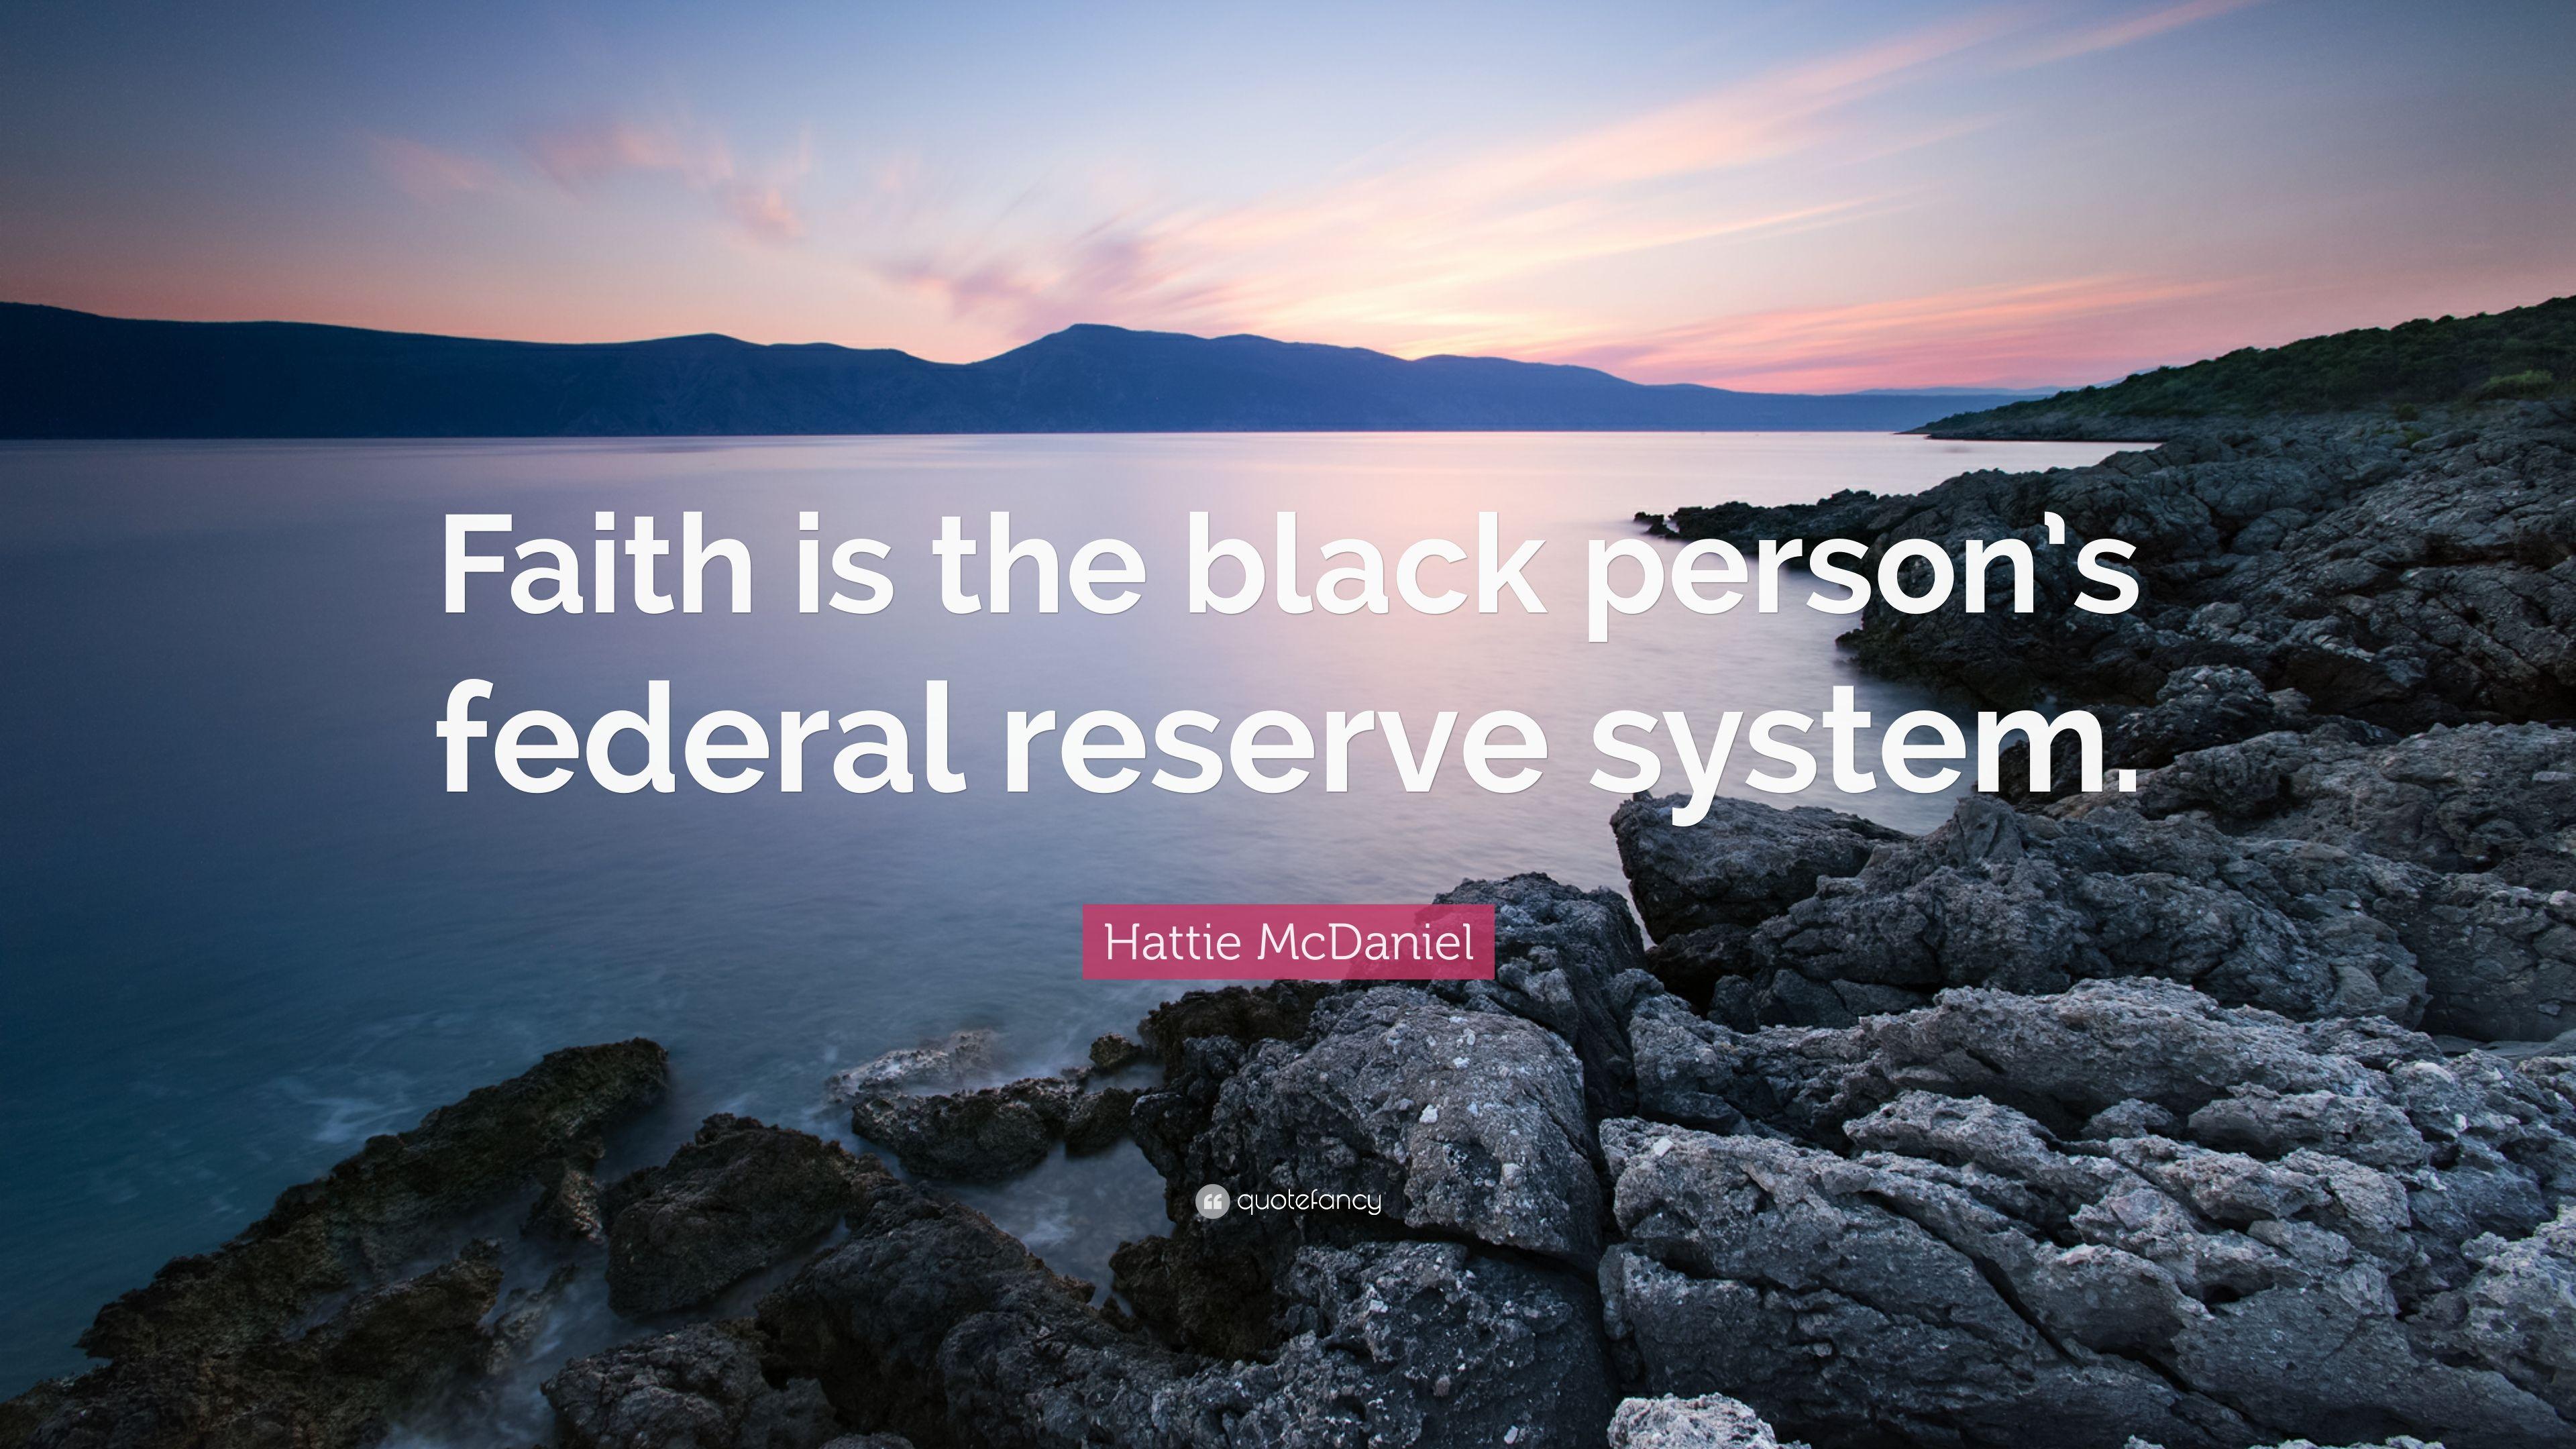 Hattie McDaniel Quote: “Faith is the black person's federal reserve